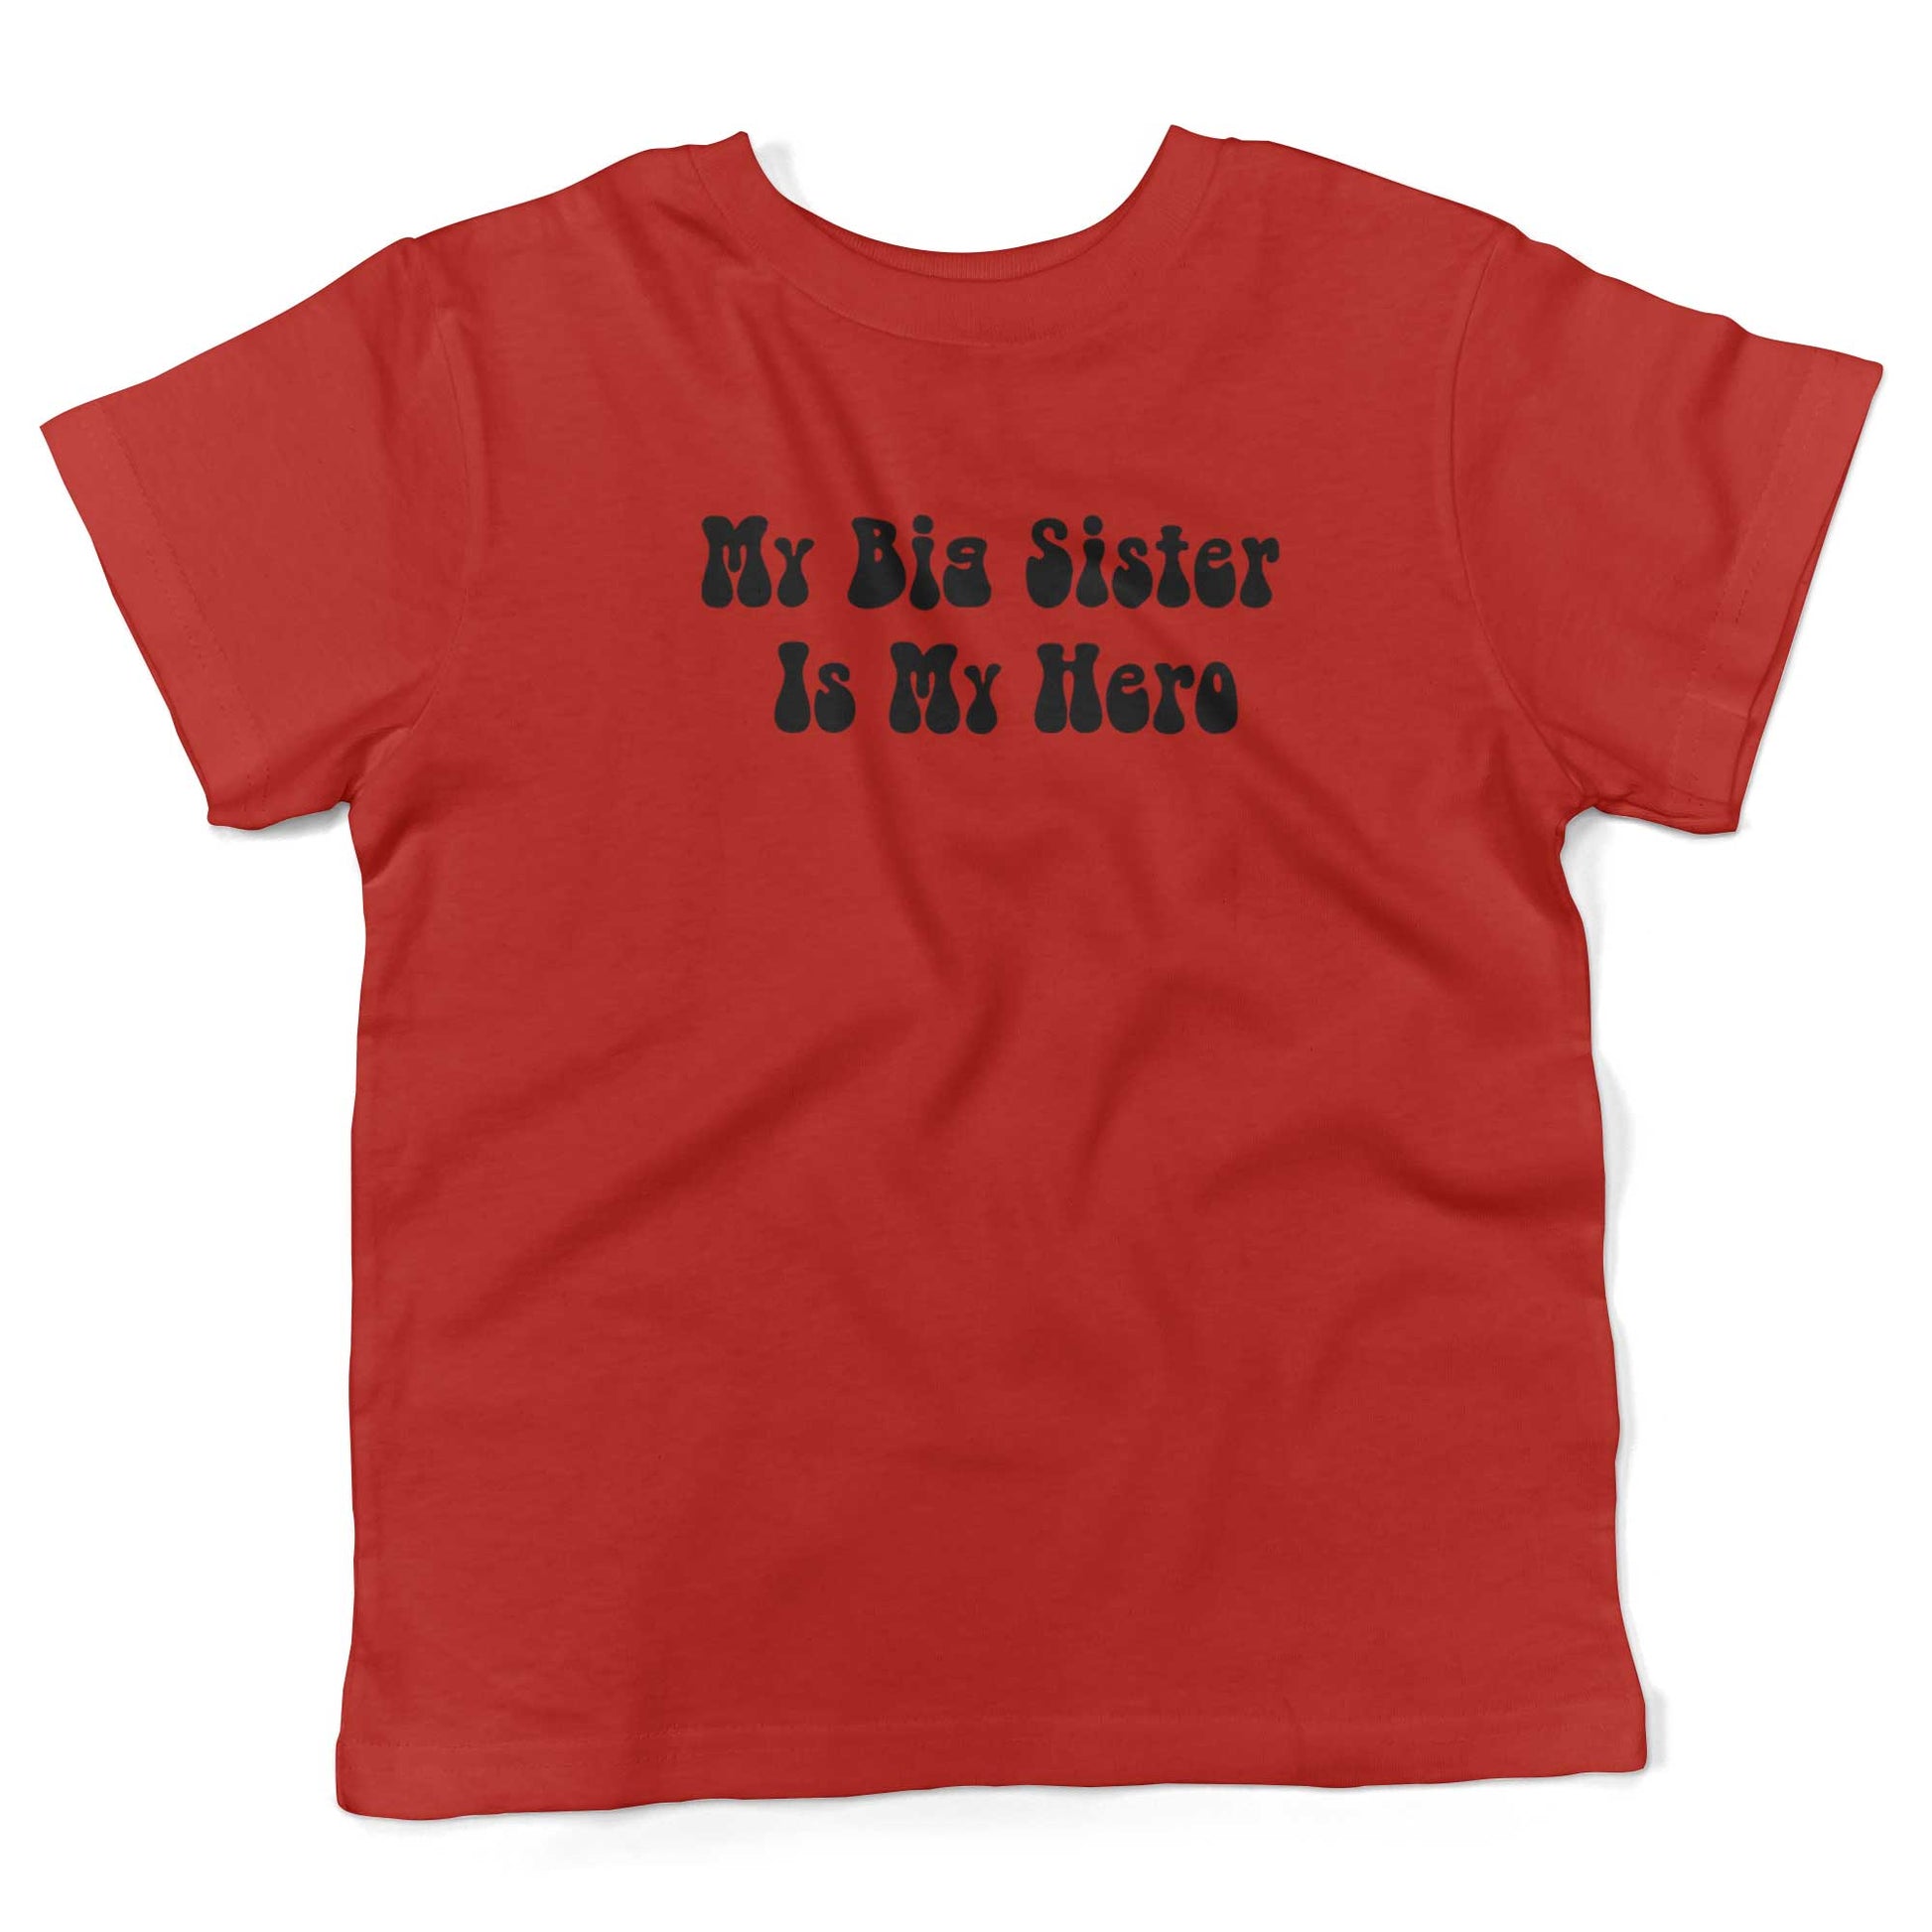 My Big Sister Is My Hero Toddler Shirt-Red-2T